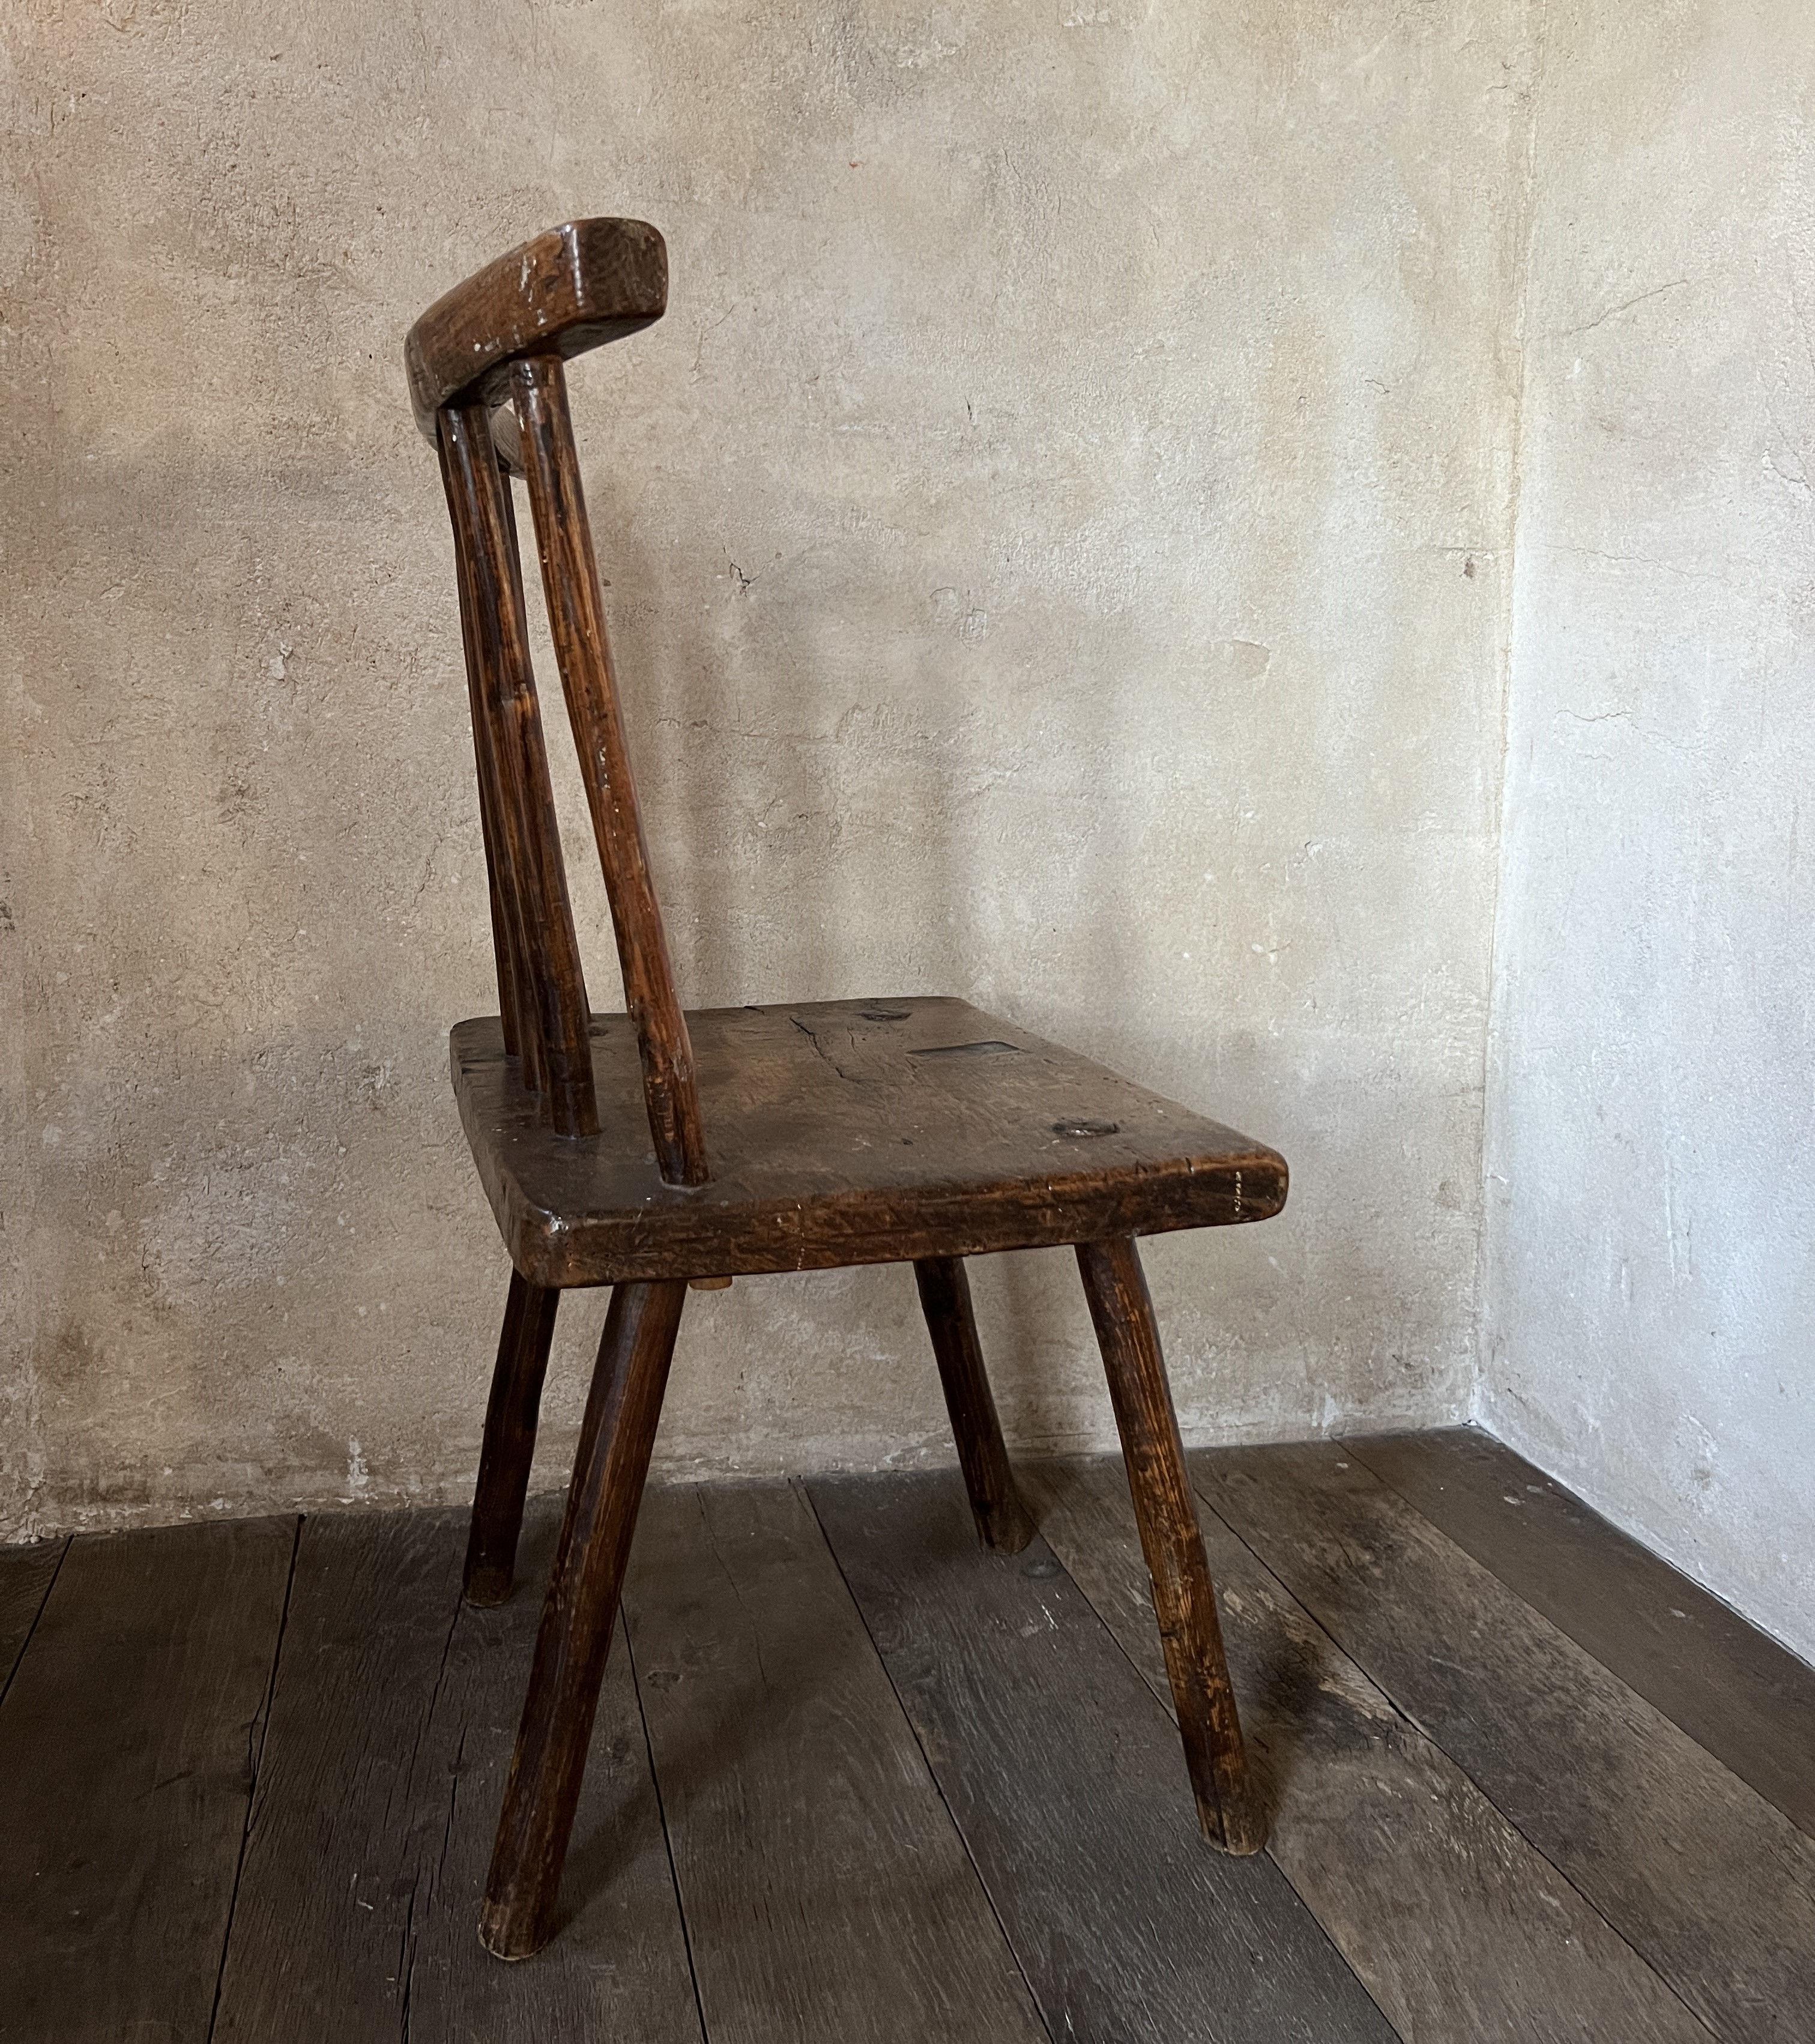 Hand-Crafted Primitive 19th century chair